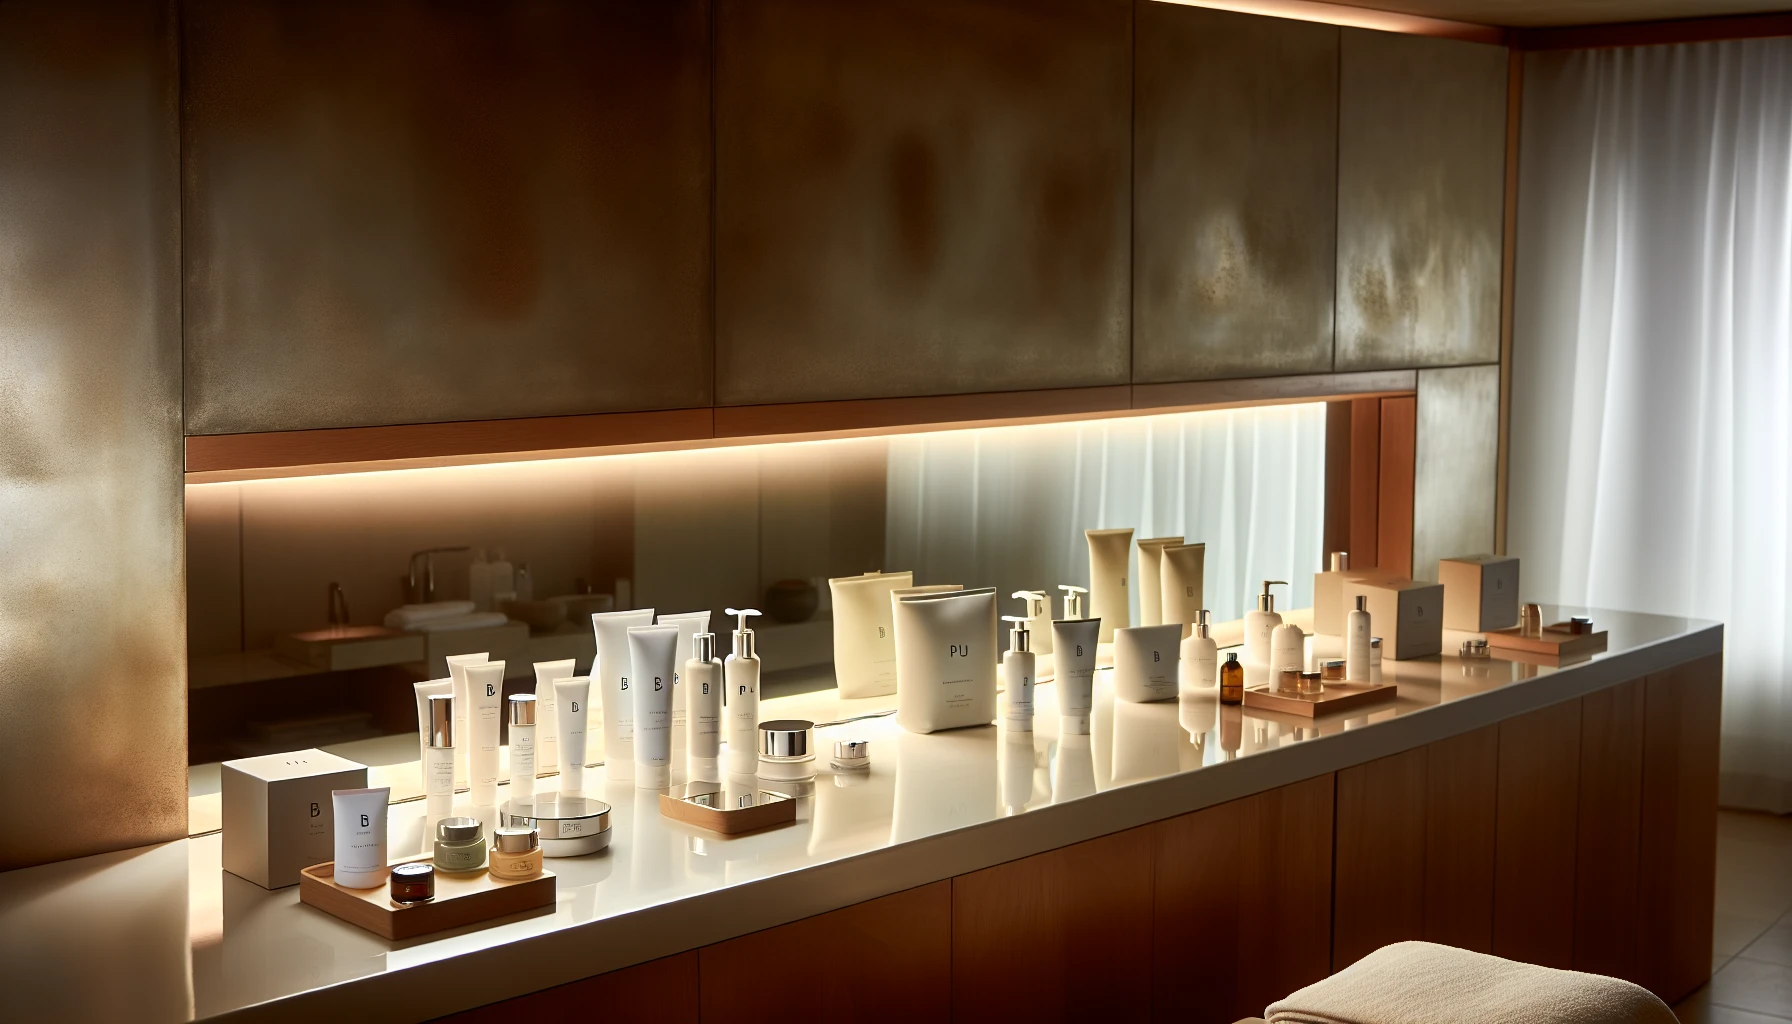 Luxurious Skincare Treatments. A serene spa setting with soft lighting and skincare products arranged neatly on a shelf.